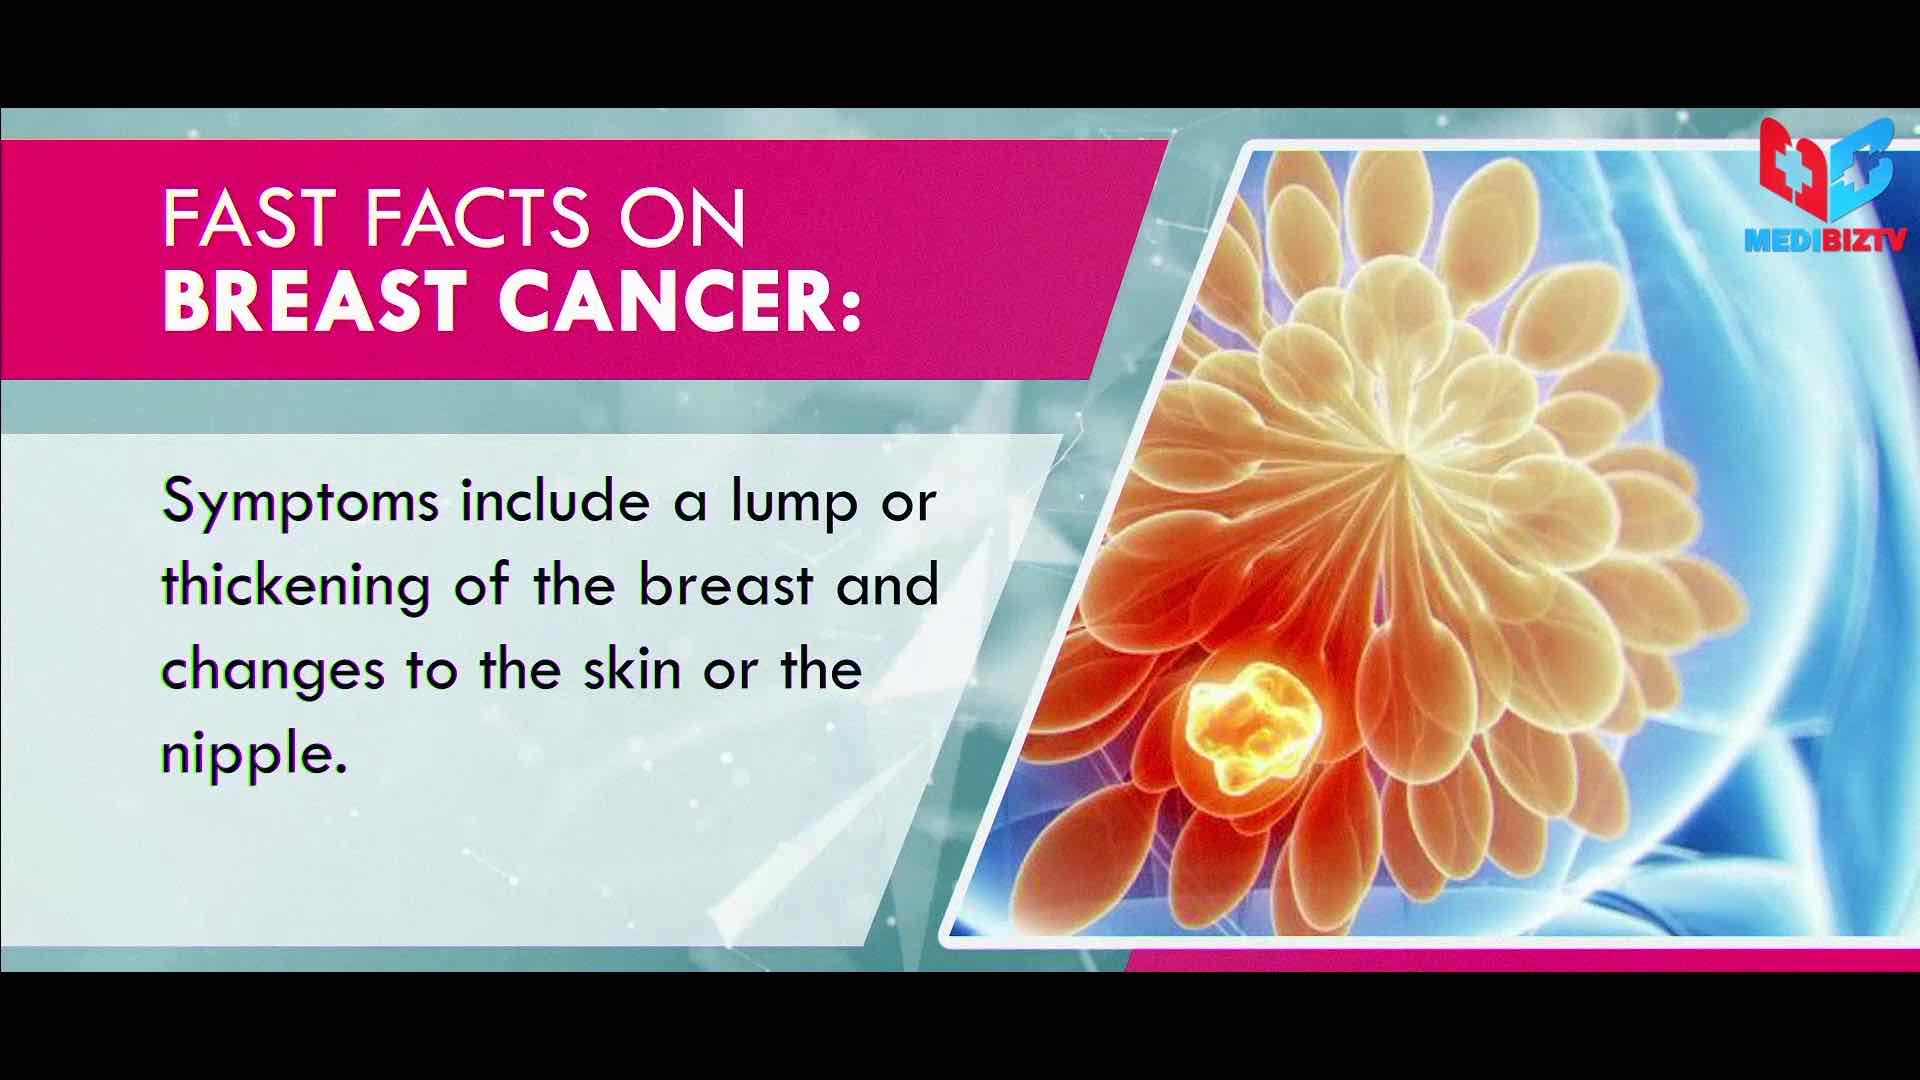 Fast Facts on Breast Cancer